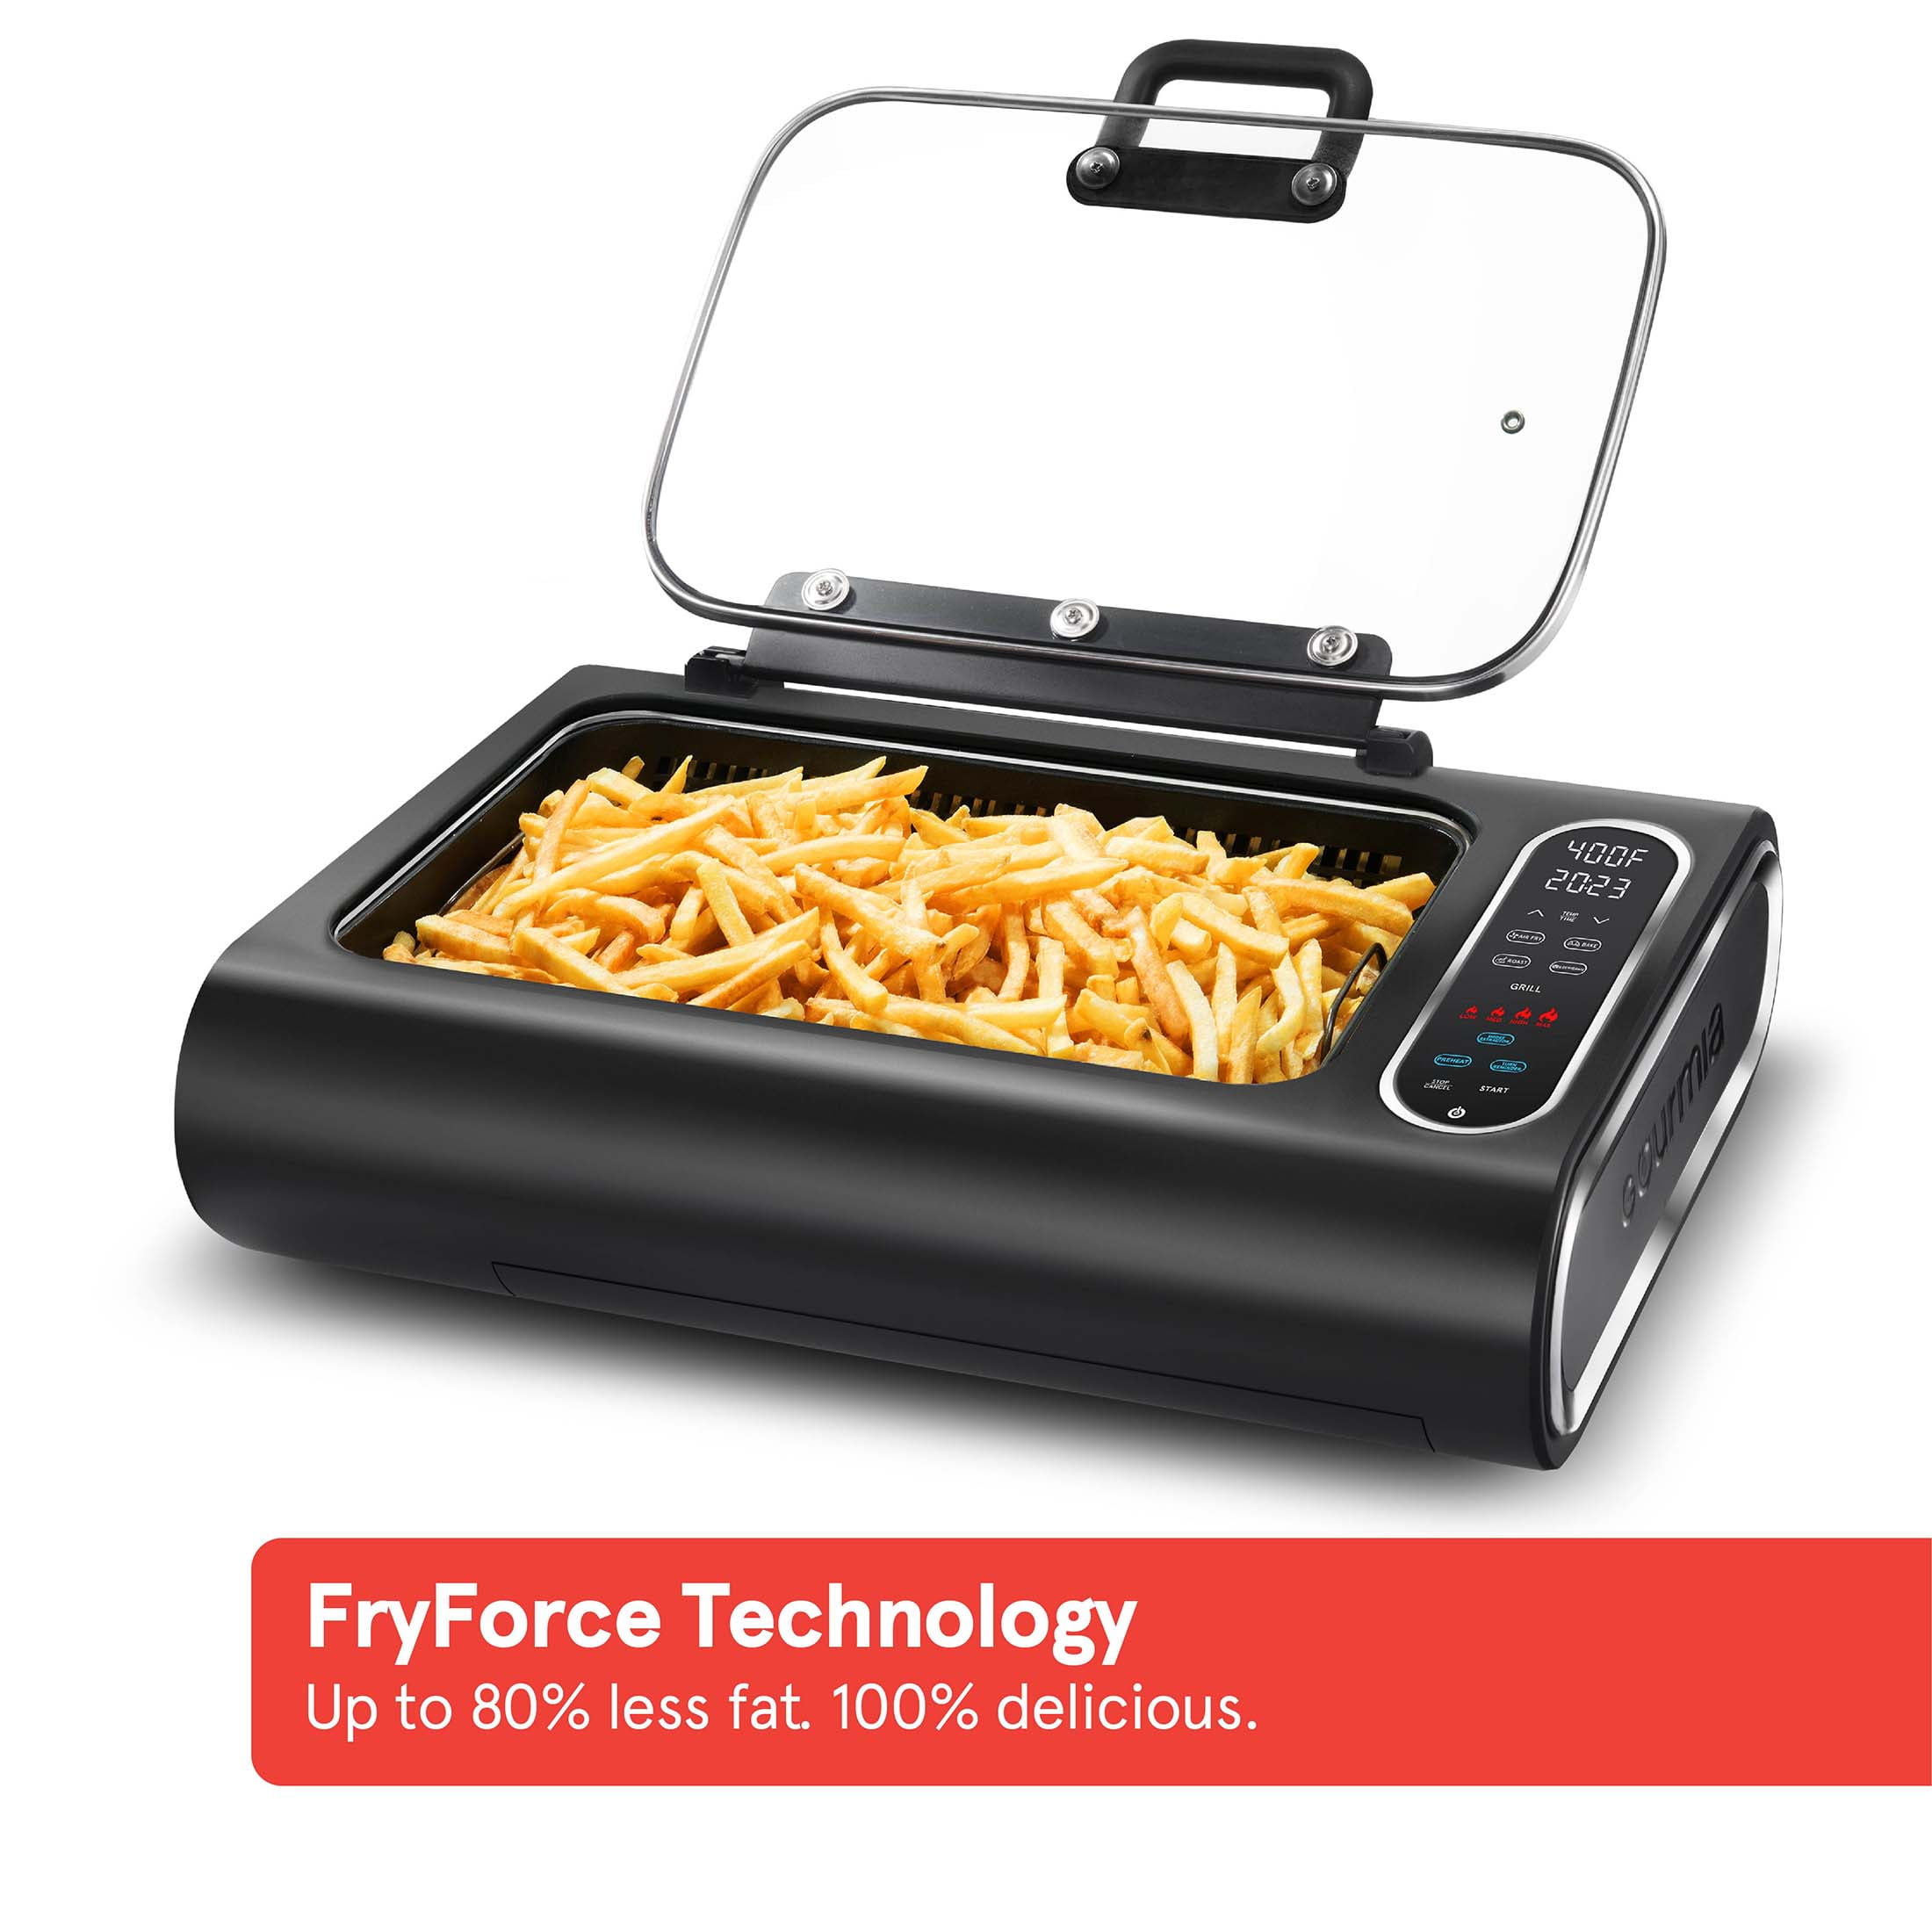 Gourmia FoodStation 5-in-1 Smokeless Grill & Air Fryer with  Smoke-Extracting Technology for Sale in Port St. Lucie, FL - OfferUp